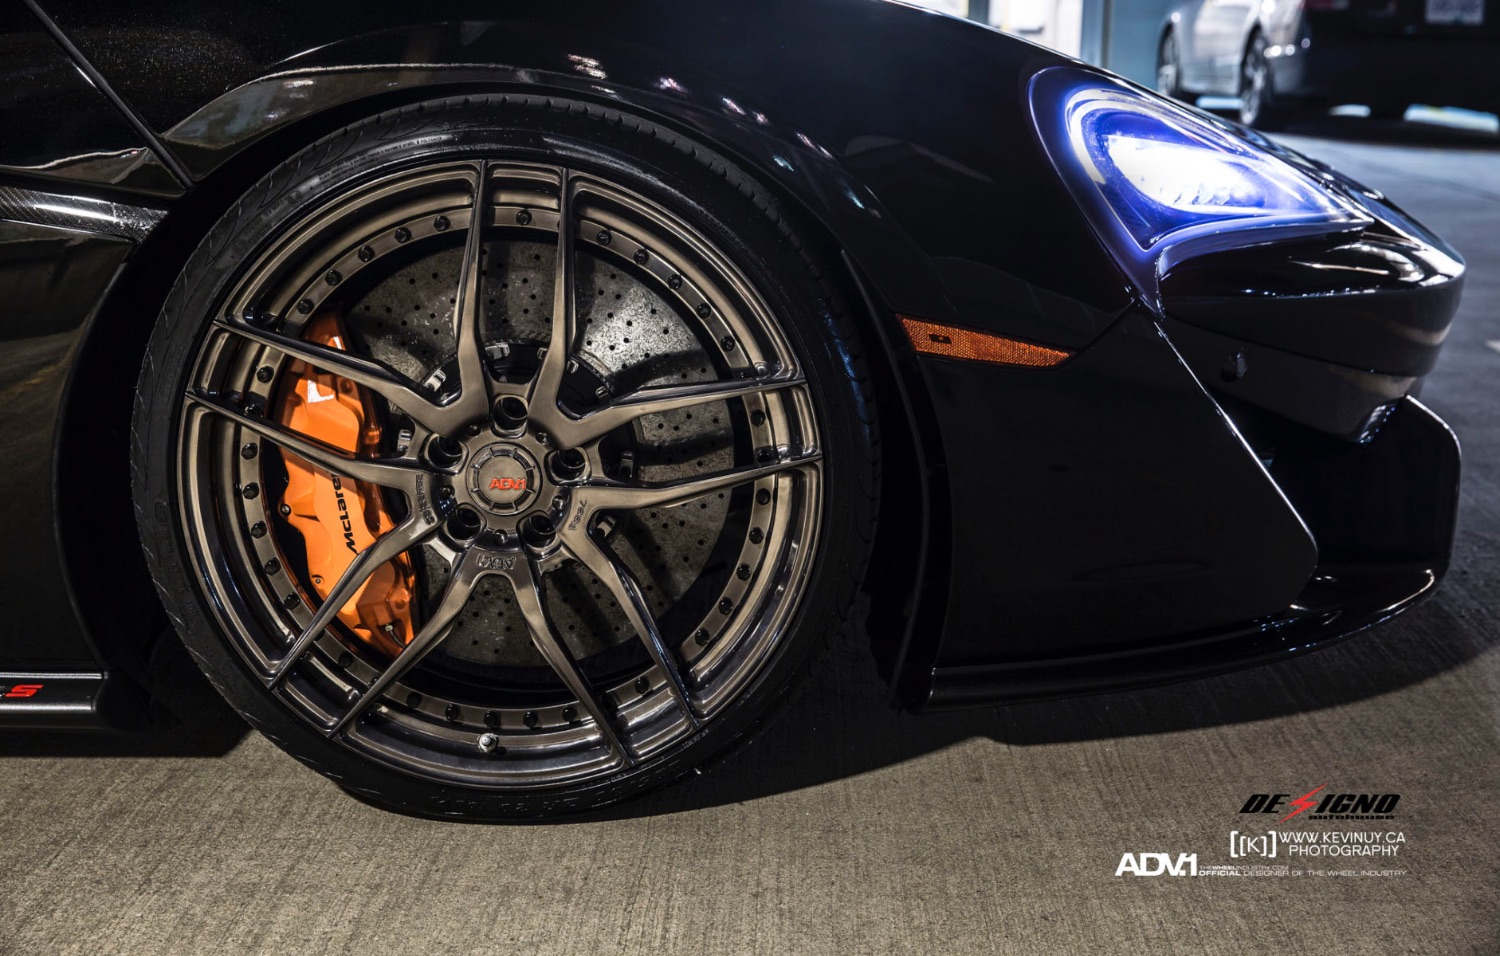 mclaren-570s-luxury-super-car-forged-racing-wheels-adv1-rims-aftermarket-F